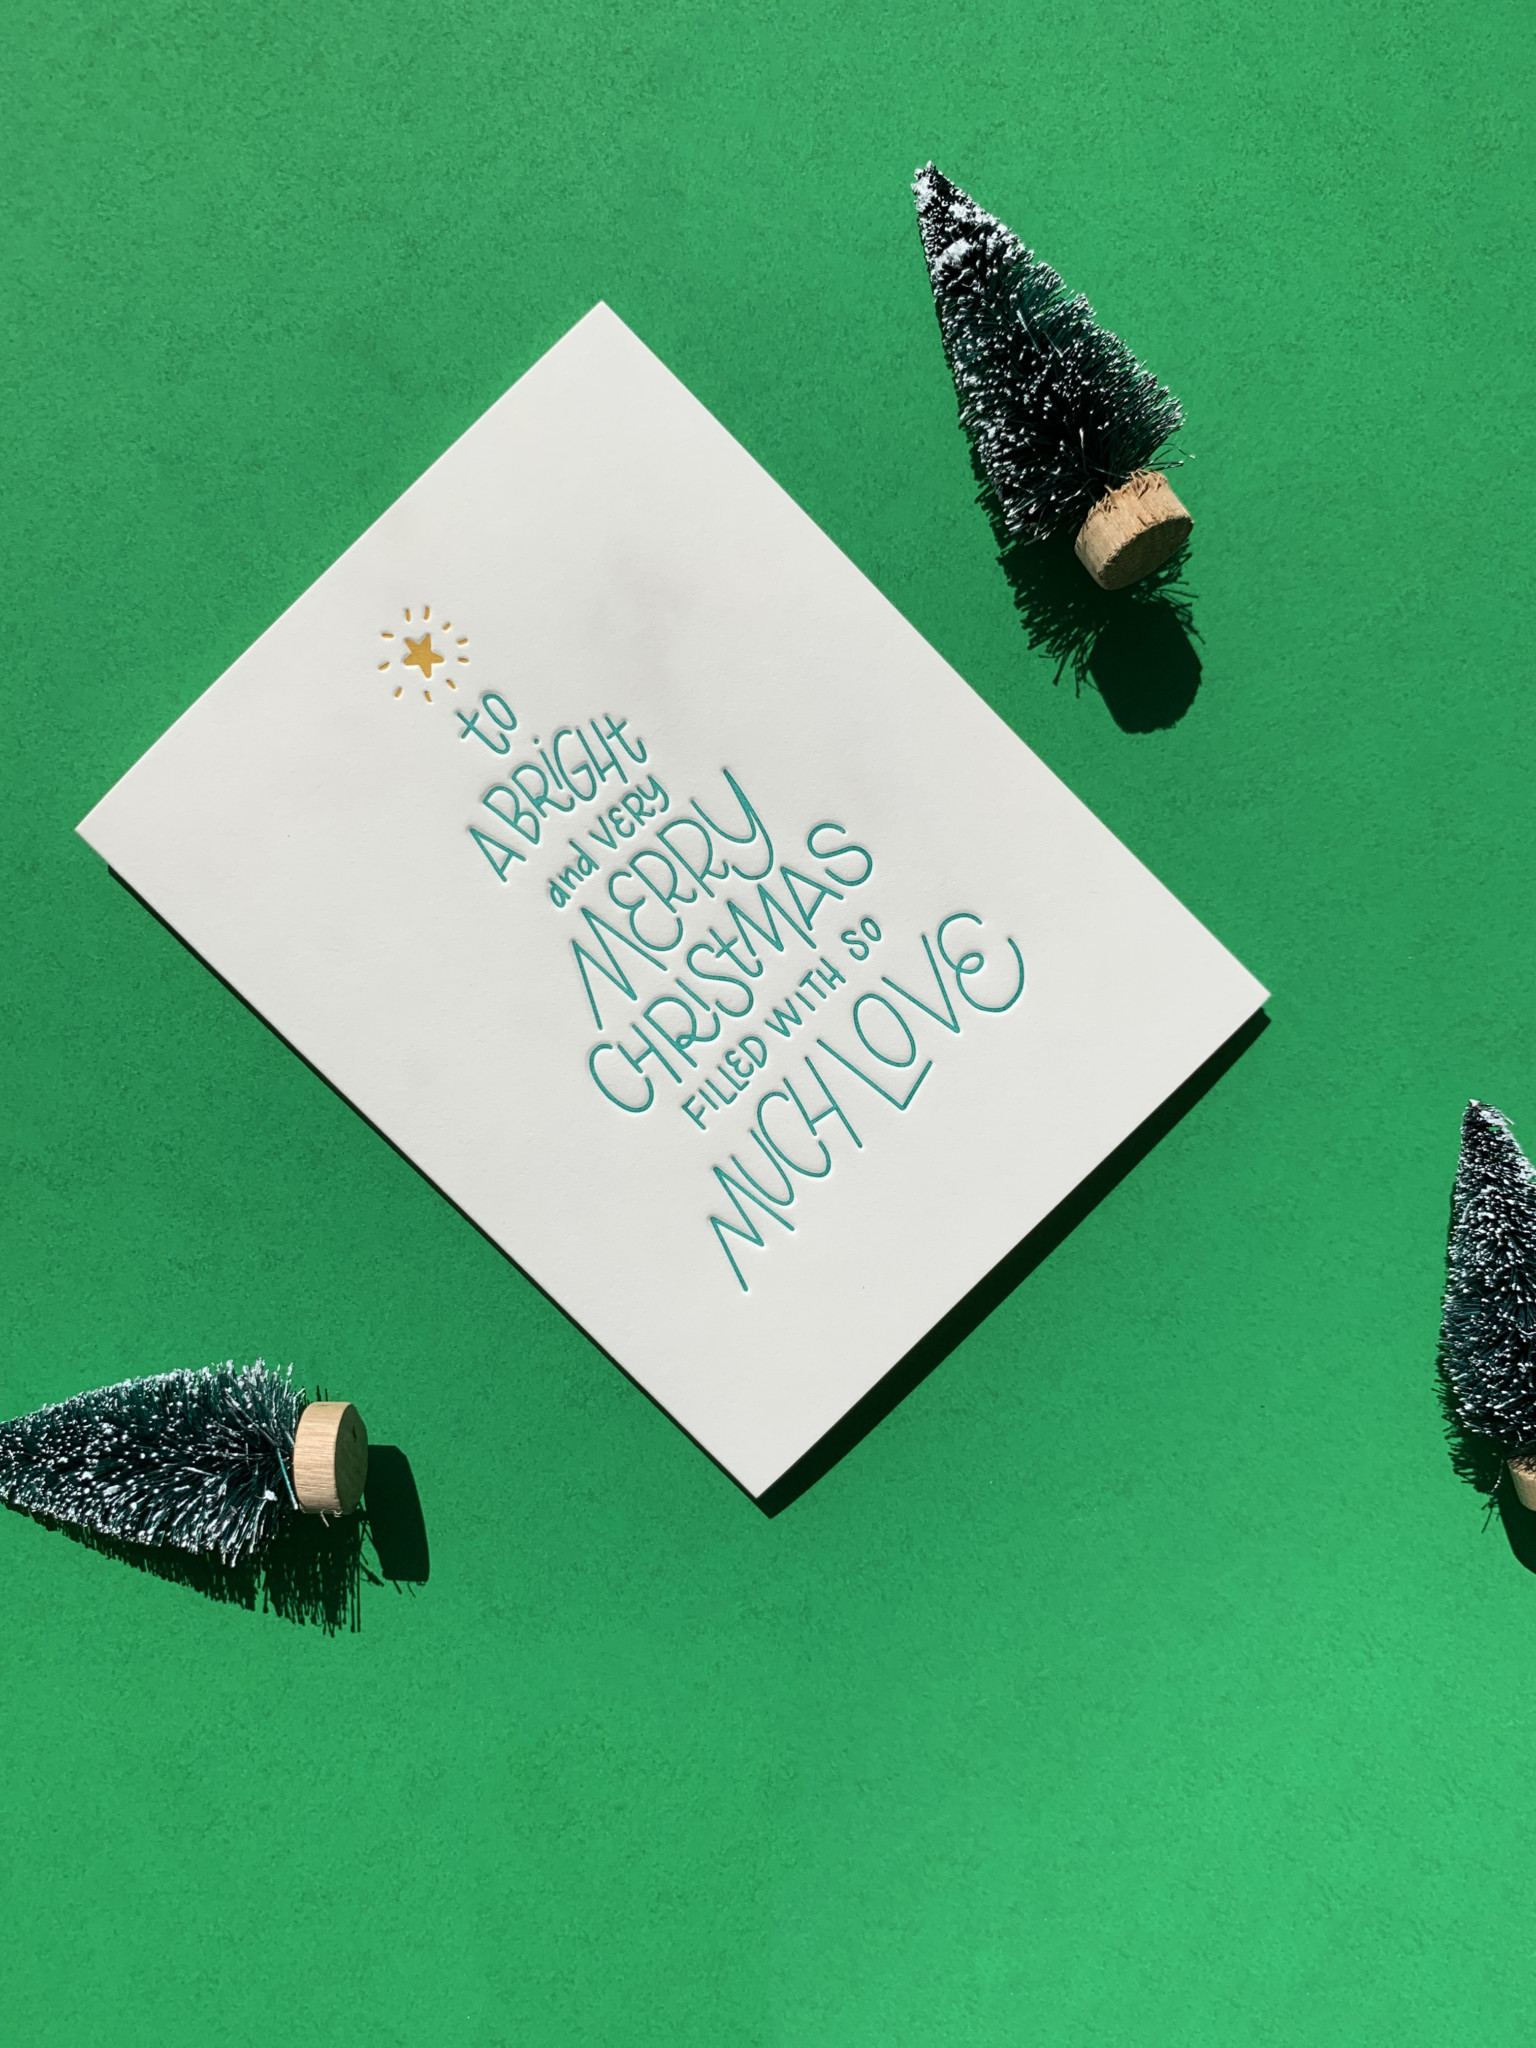 Card with handlettering in tree shape reads, "To a Bright and very Merry Christmas filled with so much love"